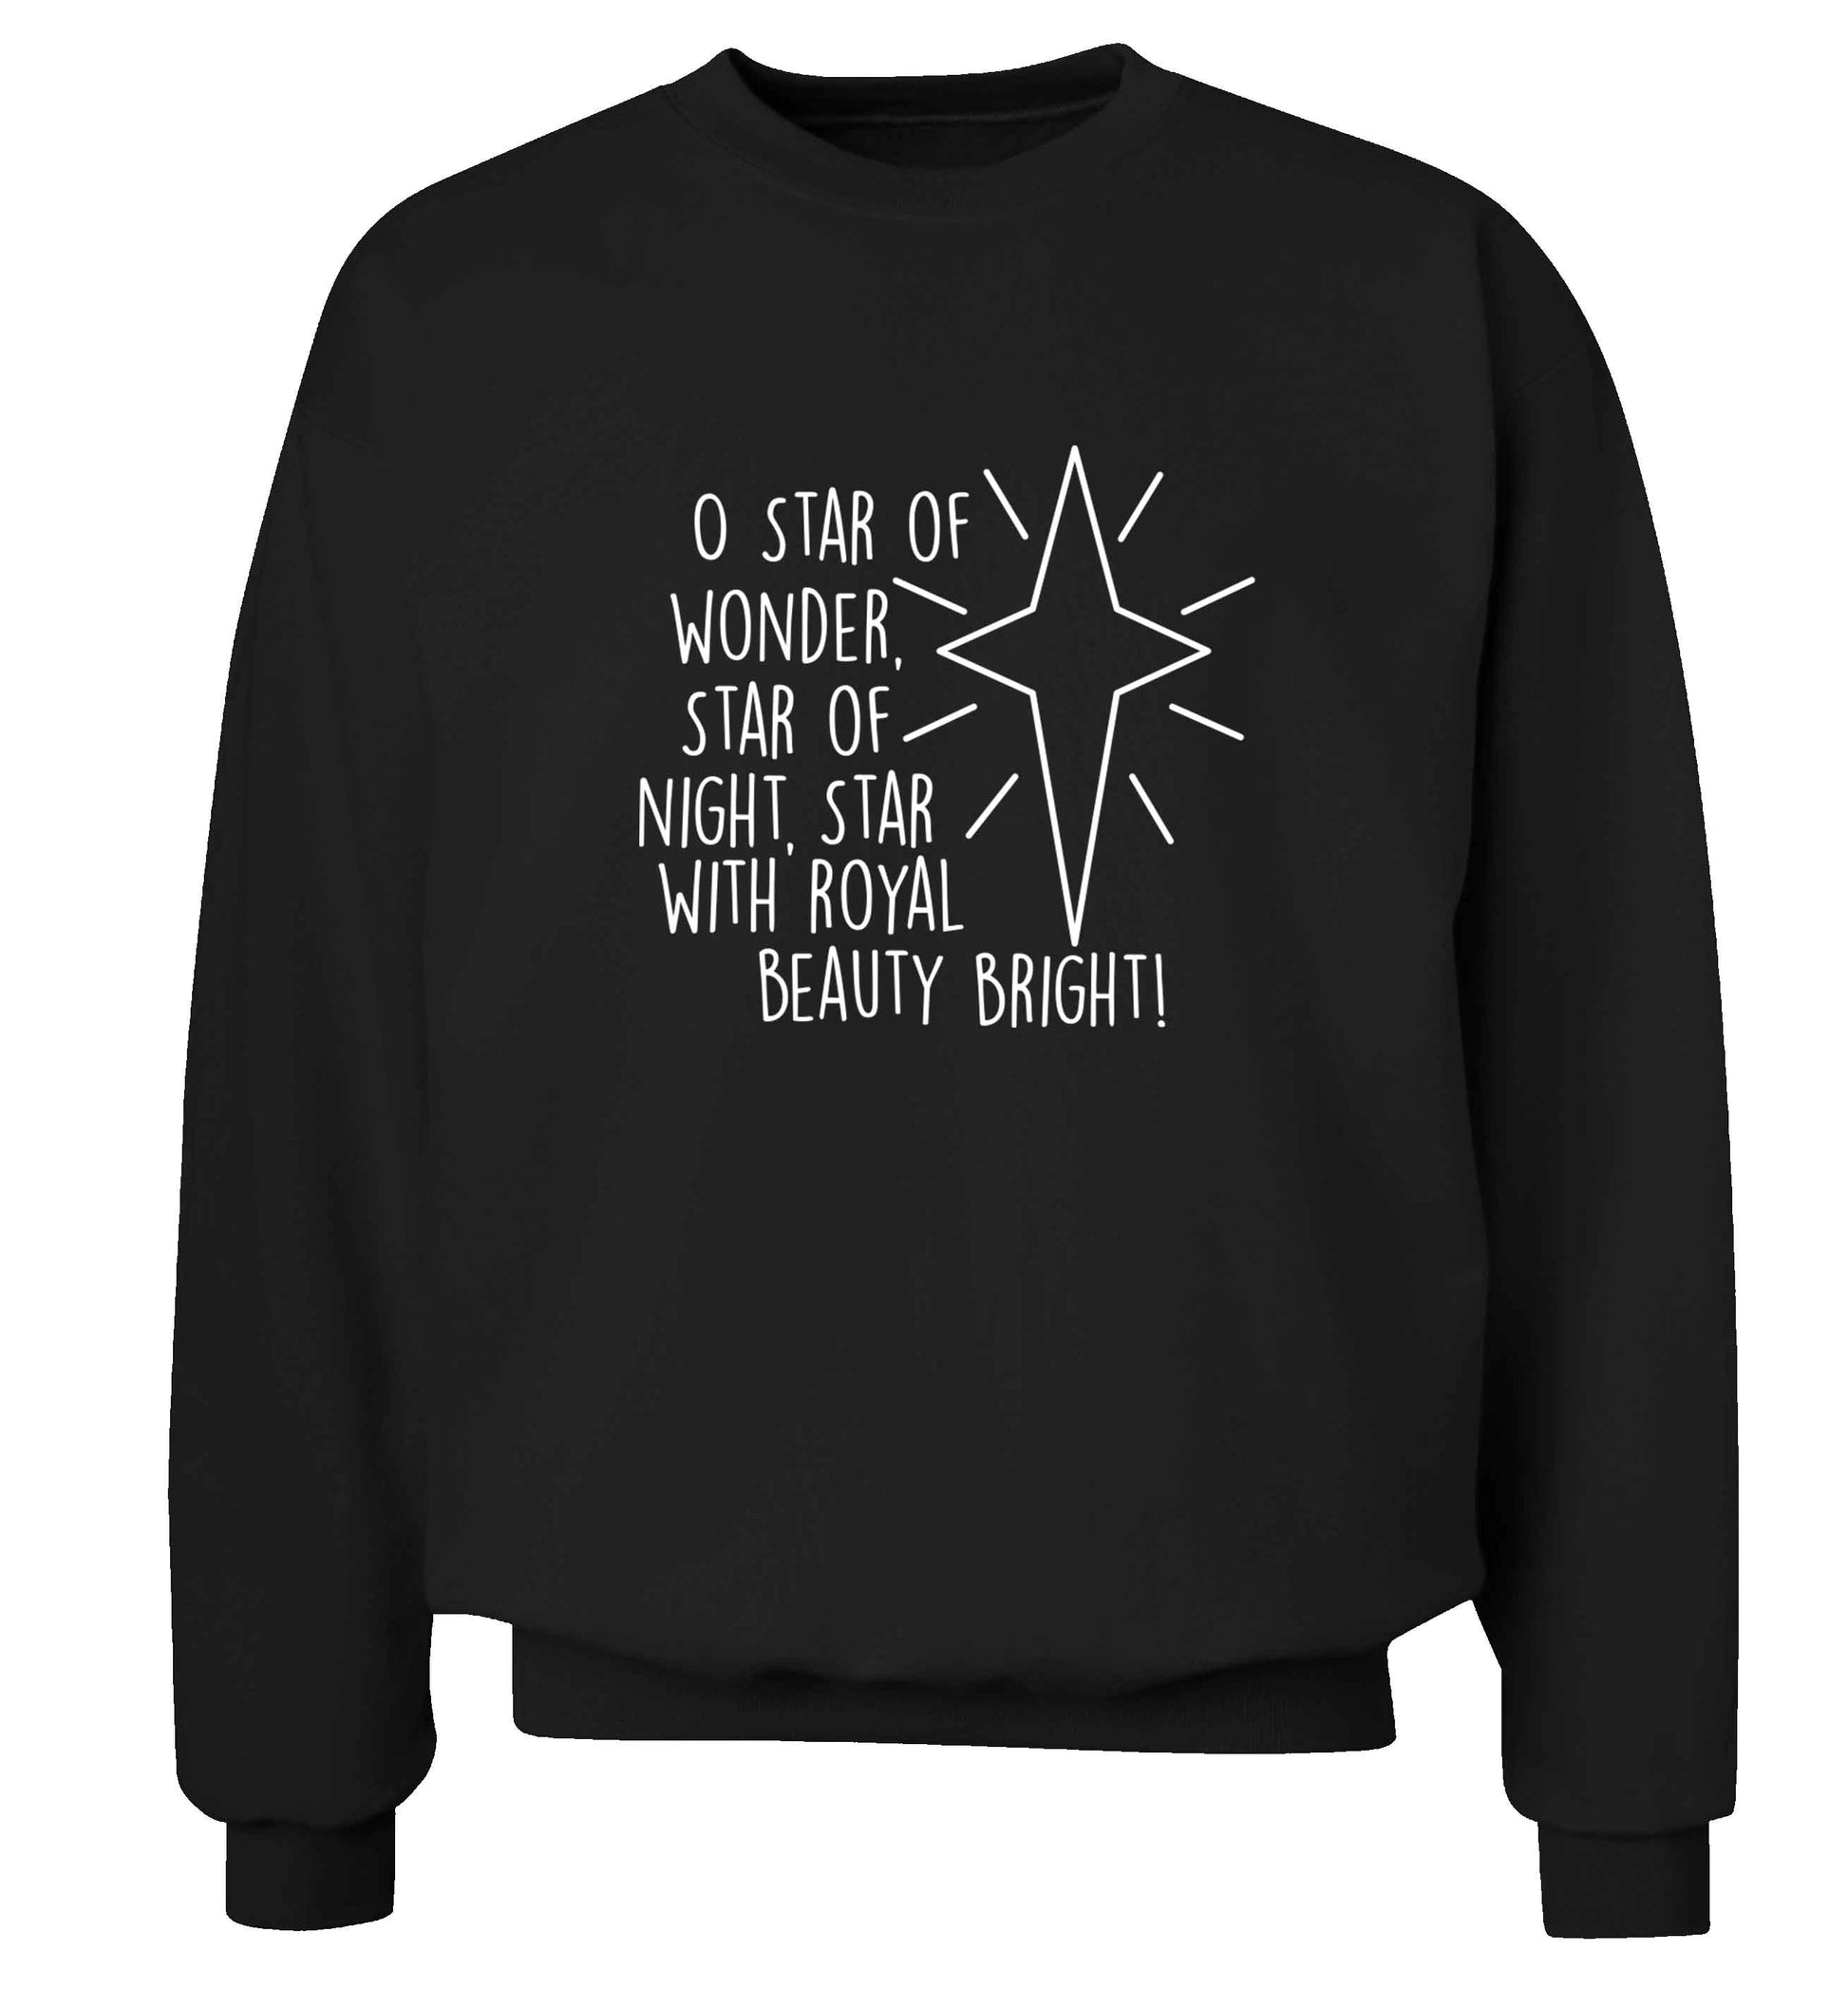 Oh star of wonder star of night, star with royal beauty bright adult's unisex black sweater 2XL